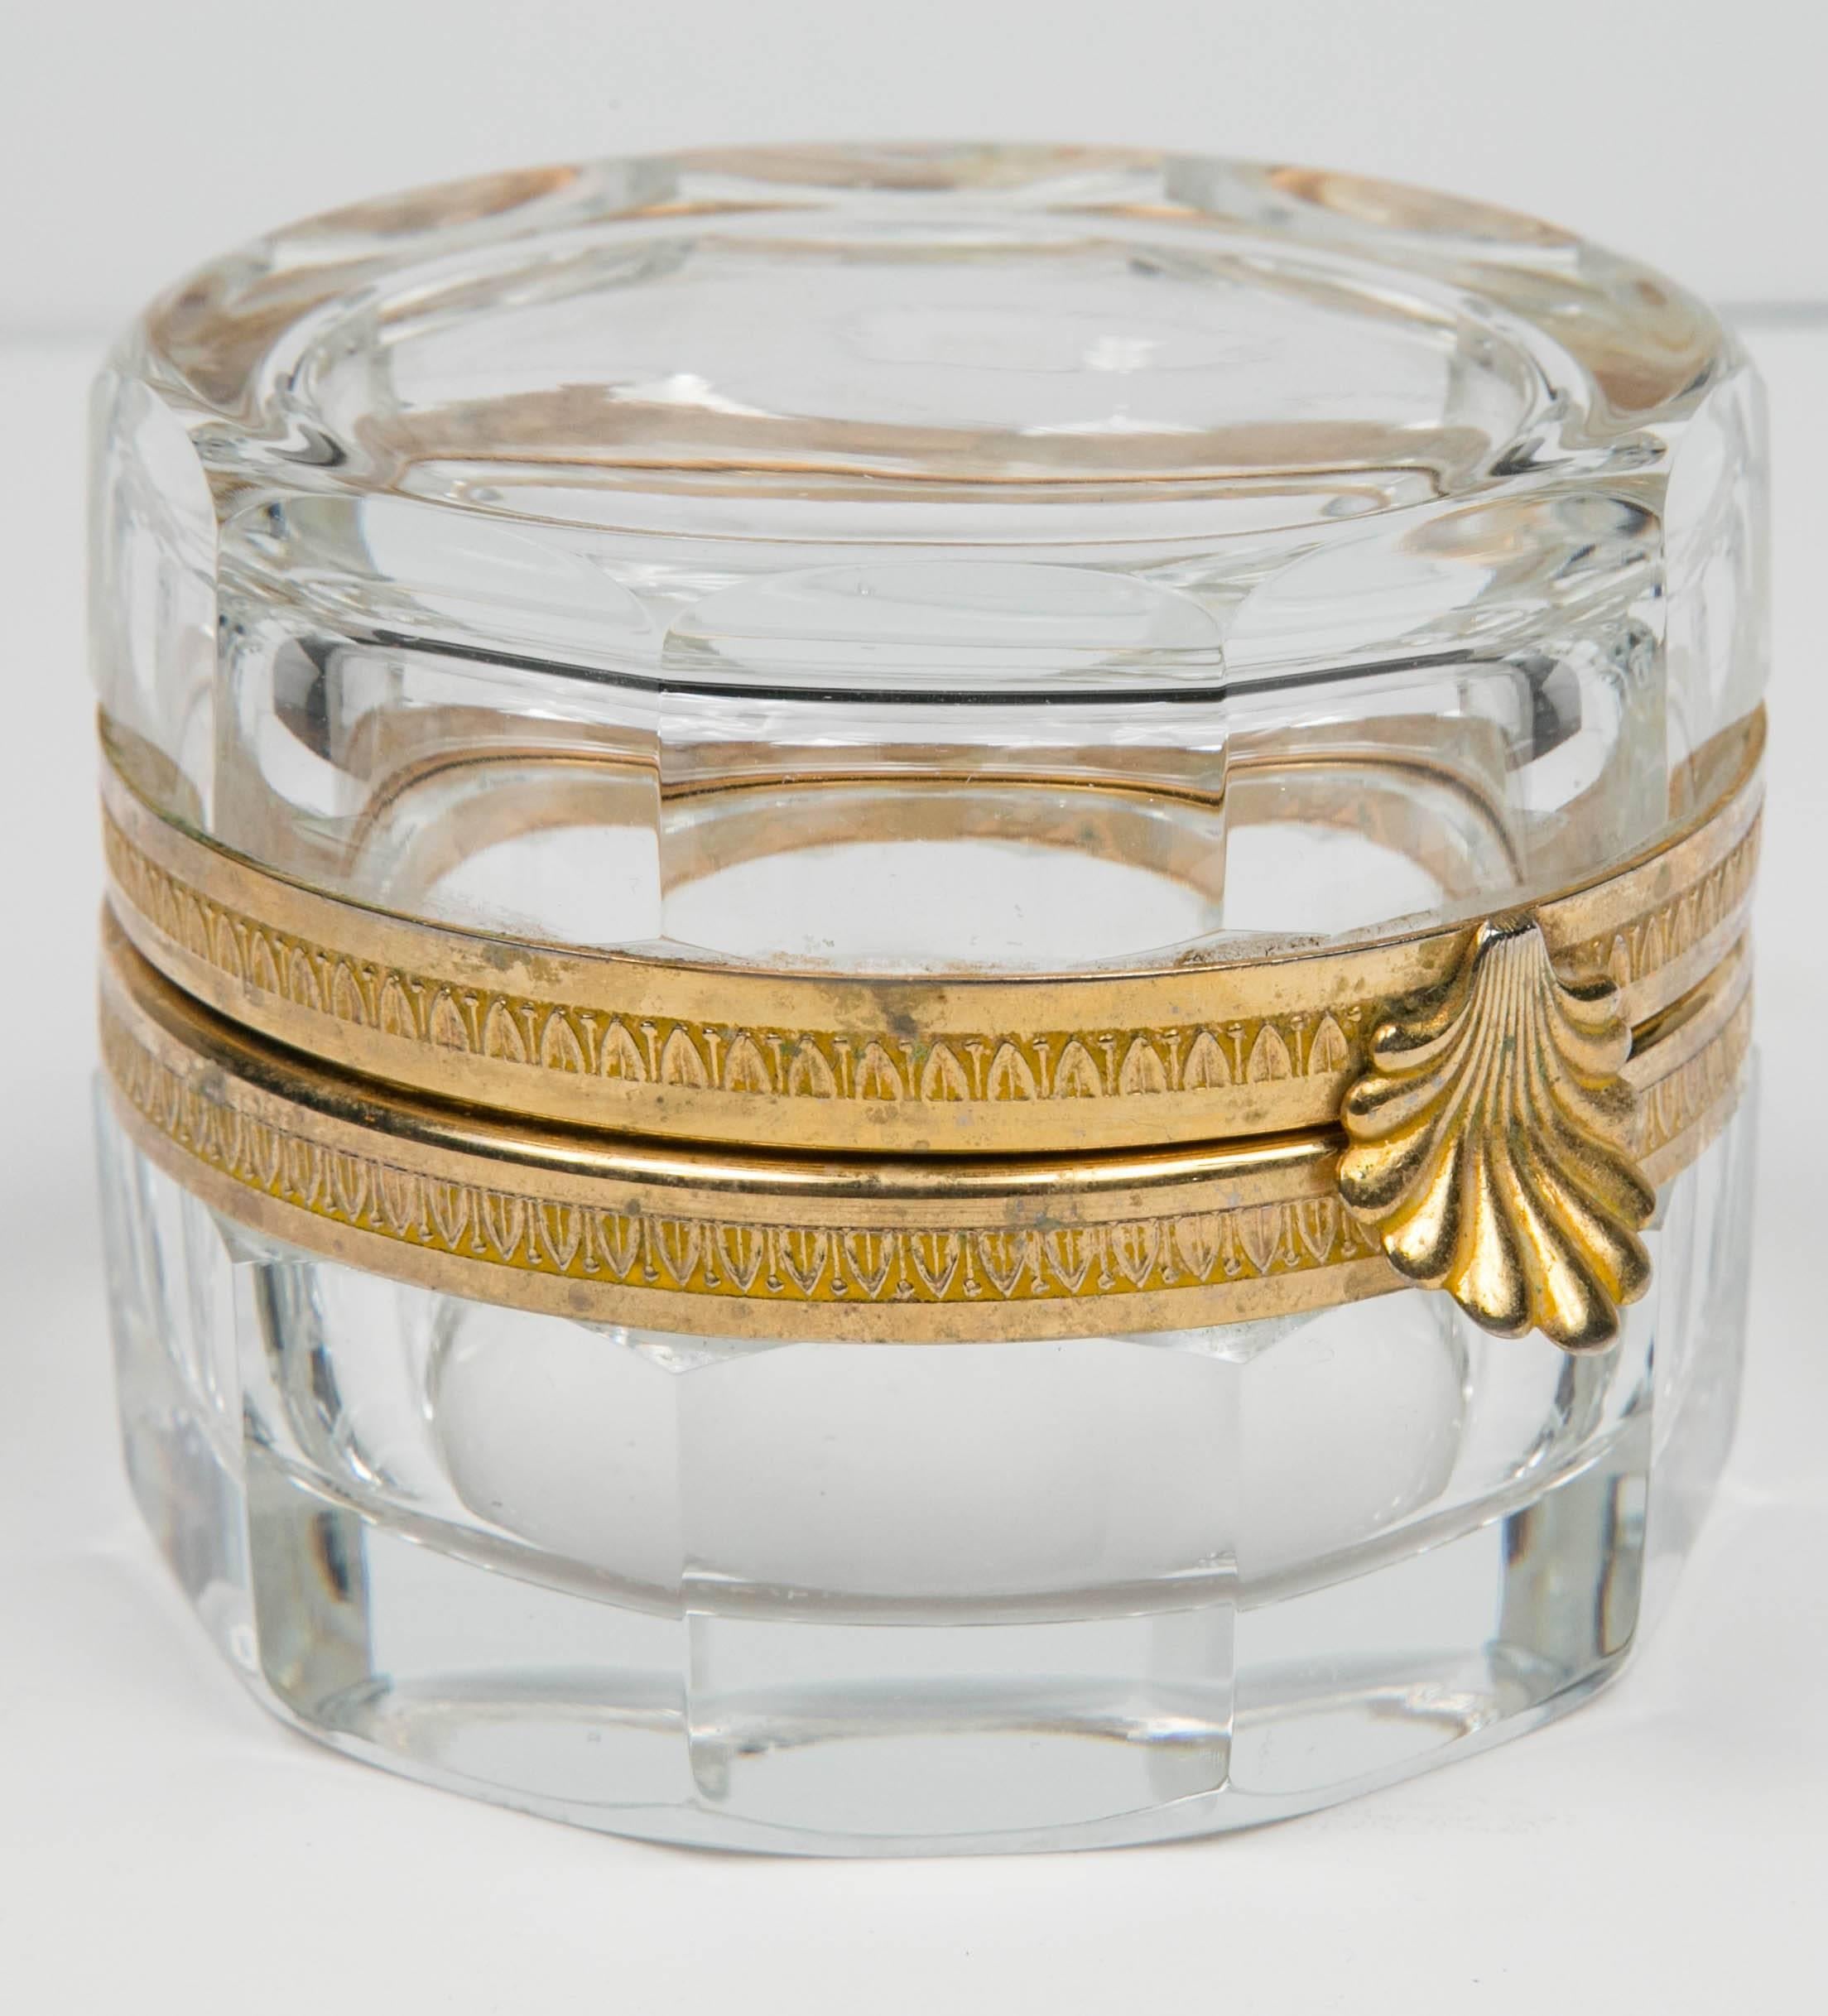 Vintage cut crystal jar box with shell closure and brass detailing at opening. Piece is signed by Martin Benito.